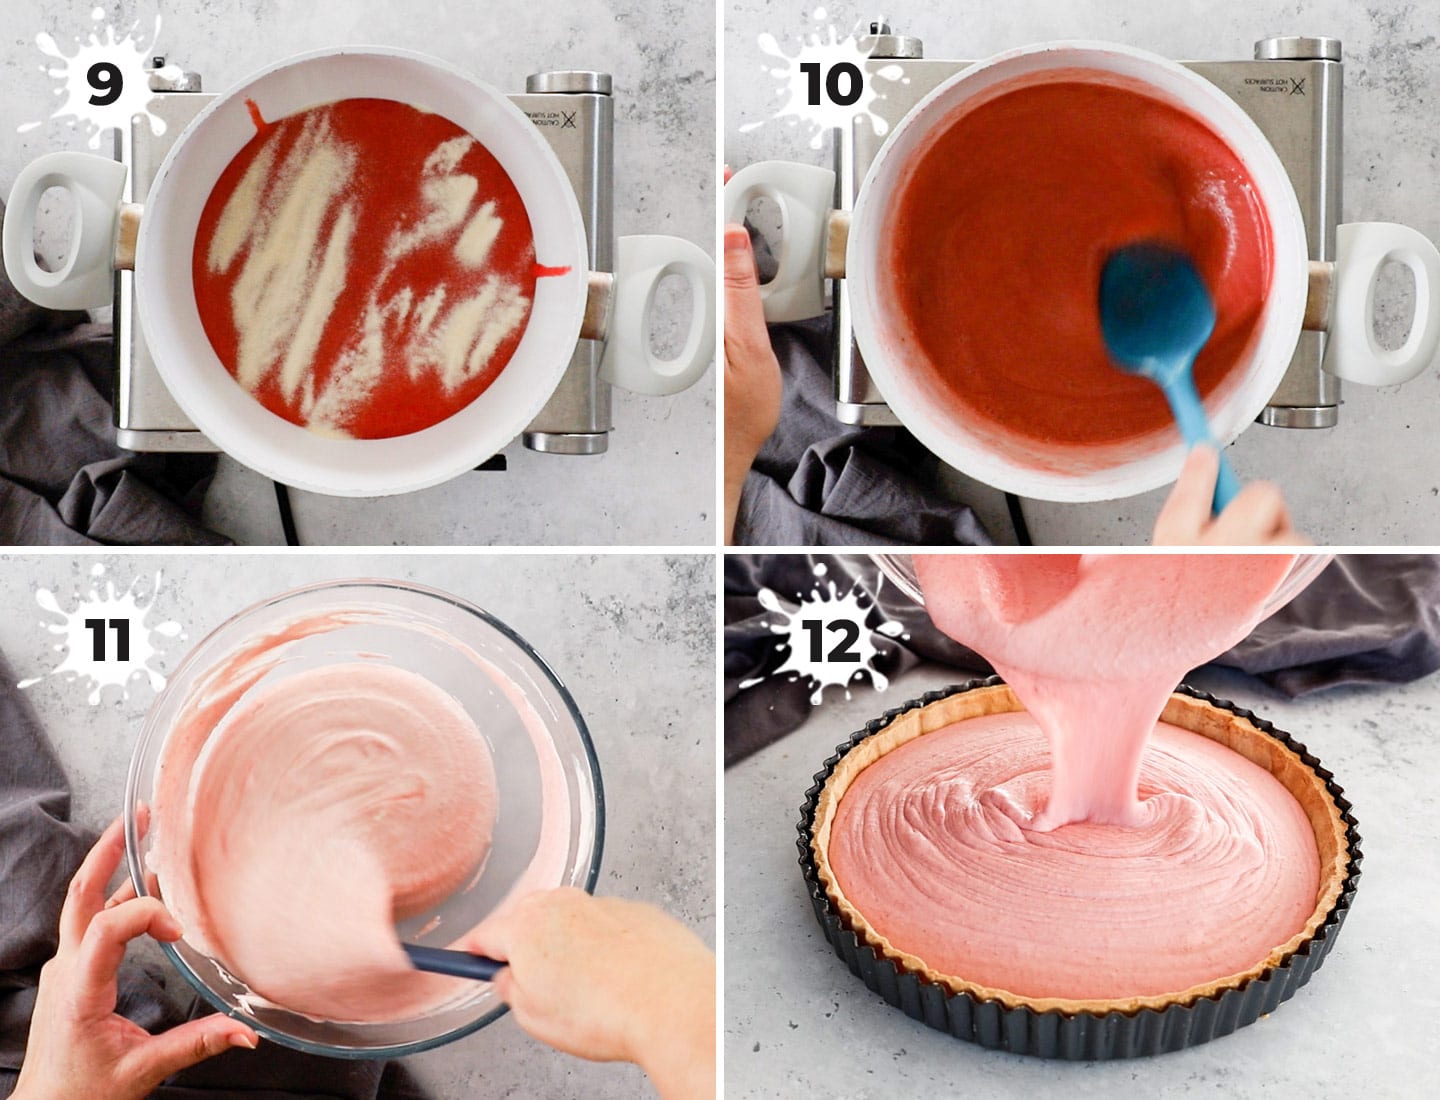 A collage showing how to make the strawberry mousse filling.